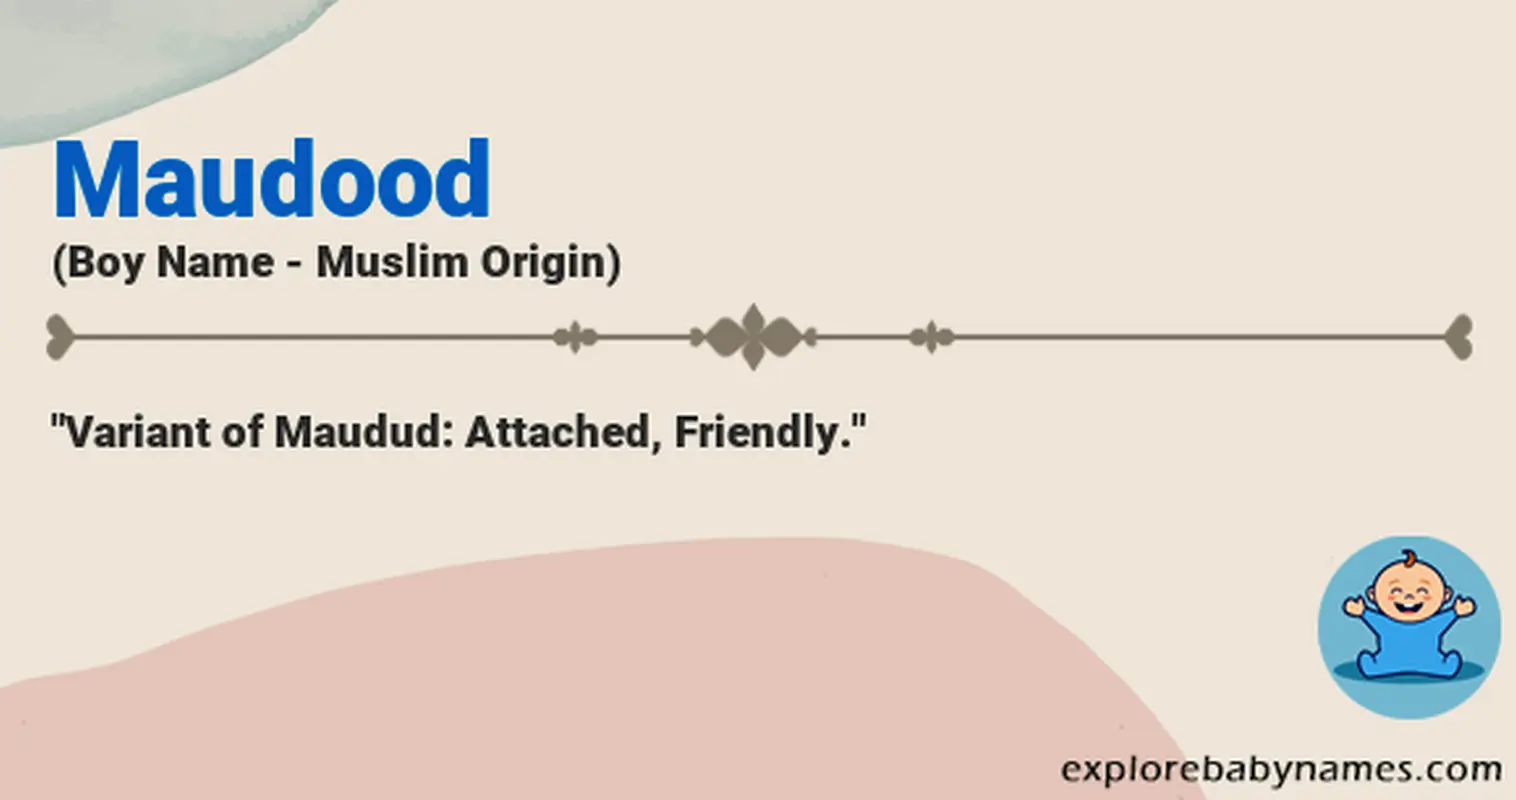 Meaning of Maudood